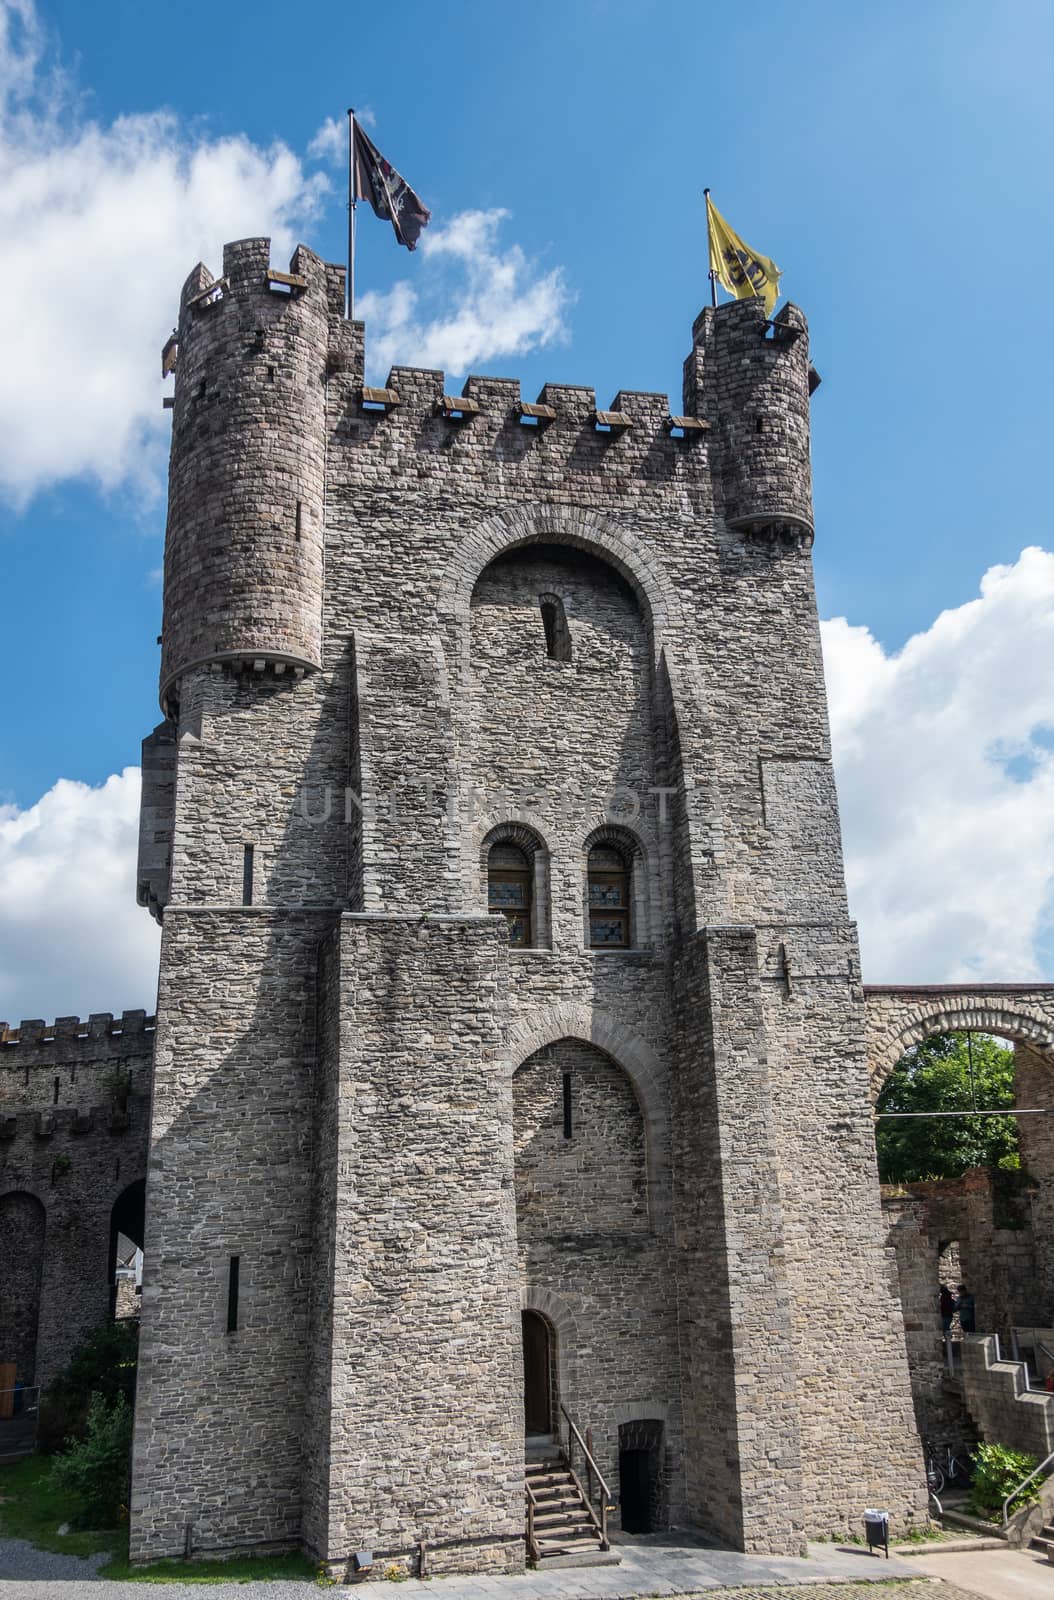 Gent, Flanders, Belgium -  June 21, 2019: Gray stone tower of Gravensteen, historic medieval castle of city against blue sky with white clouds. Flags on top, Green foliage.